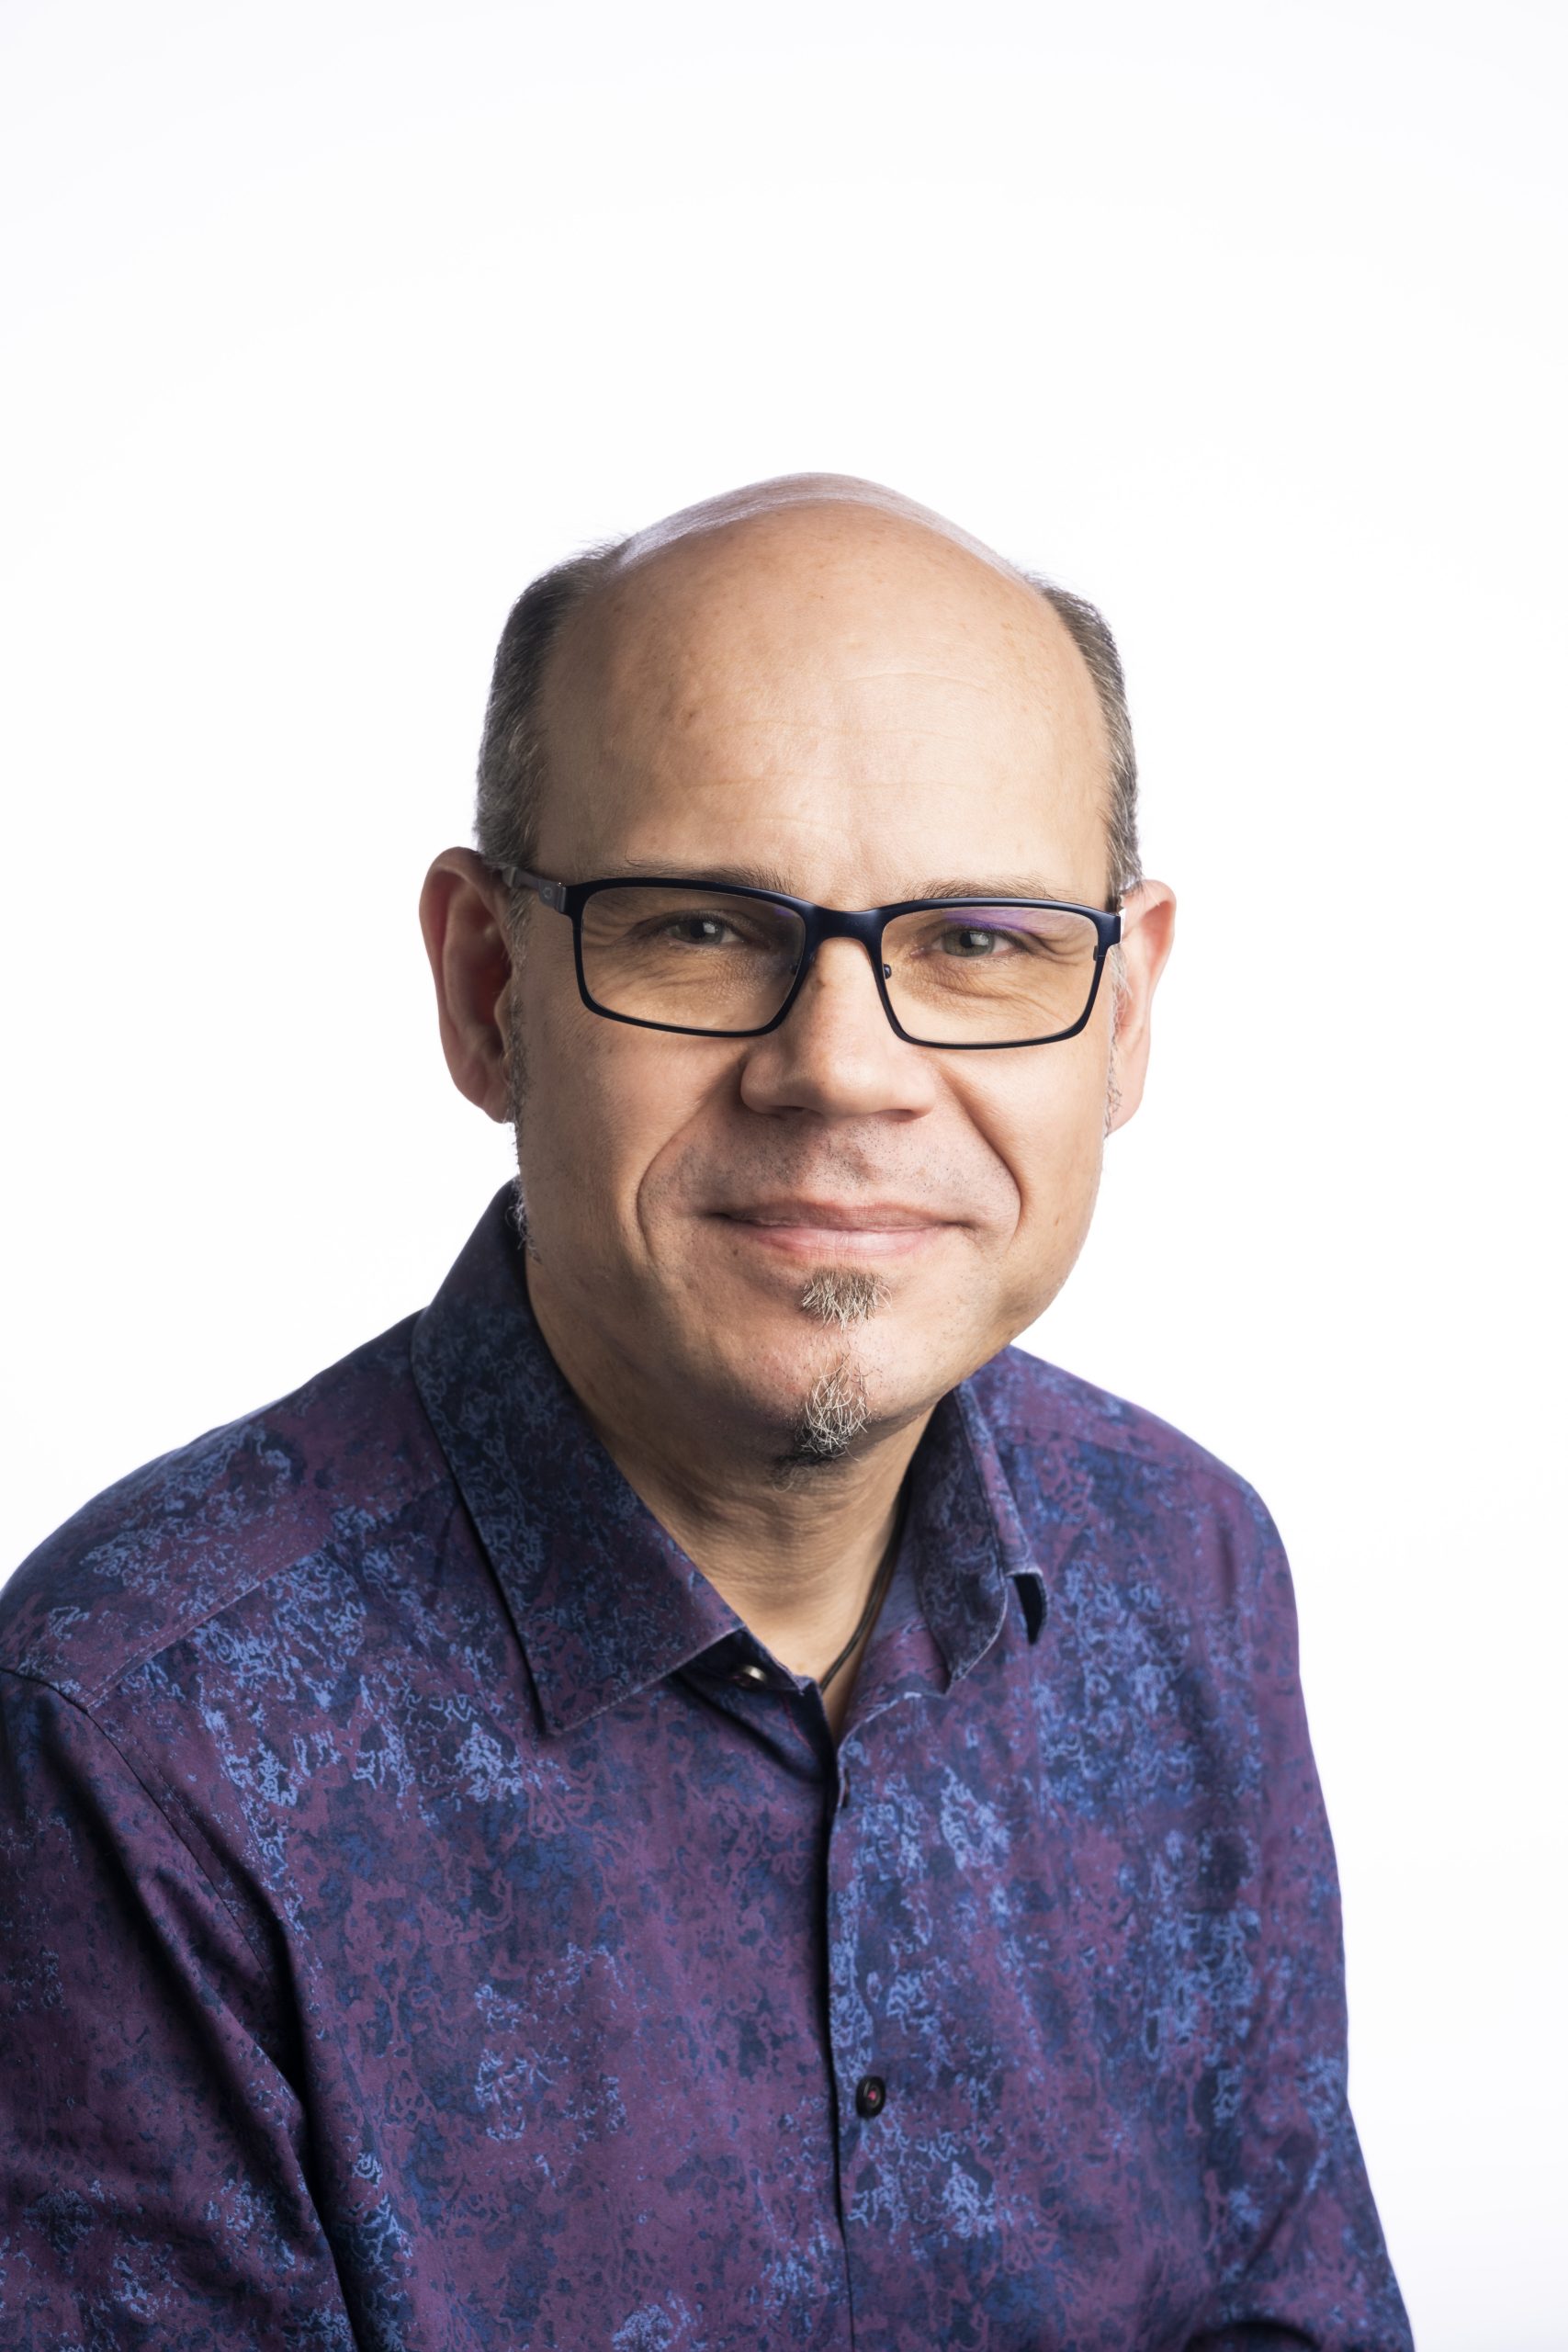 A head shot of Axel Bruns. He is wearing a colourful purple and blue button-up shirt, and wears black-rimmed glasses. He is bald.